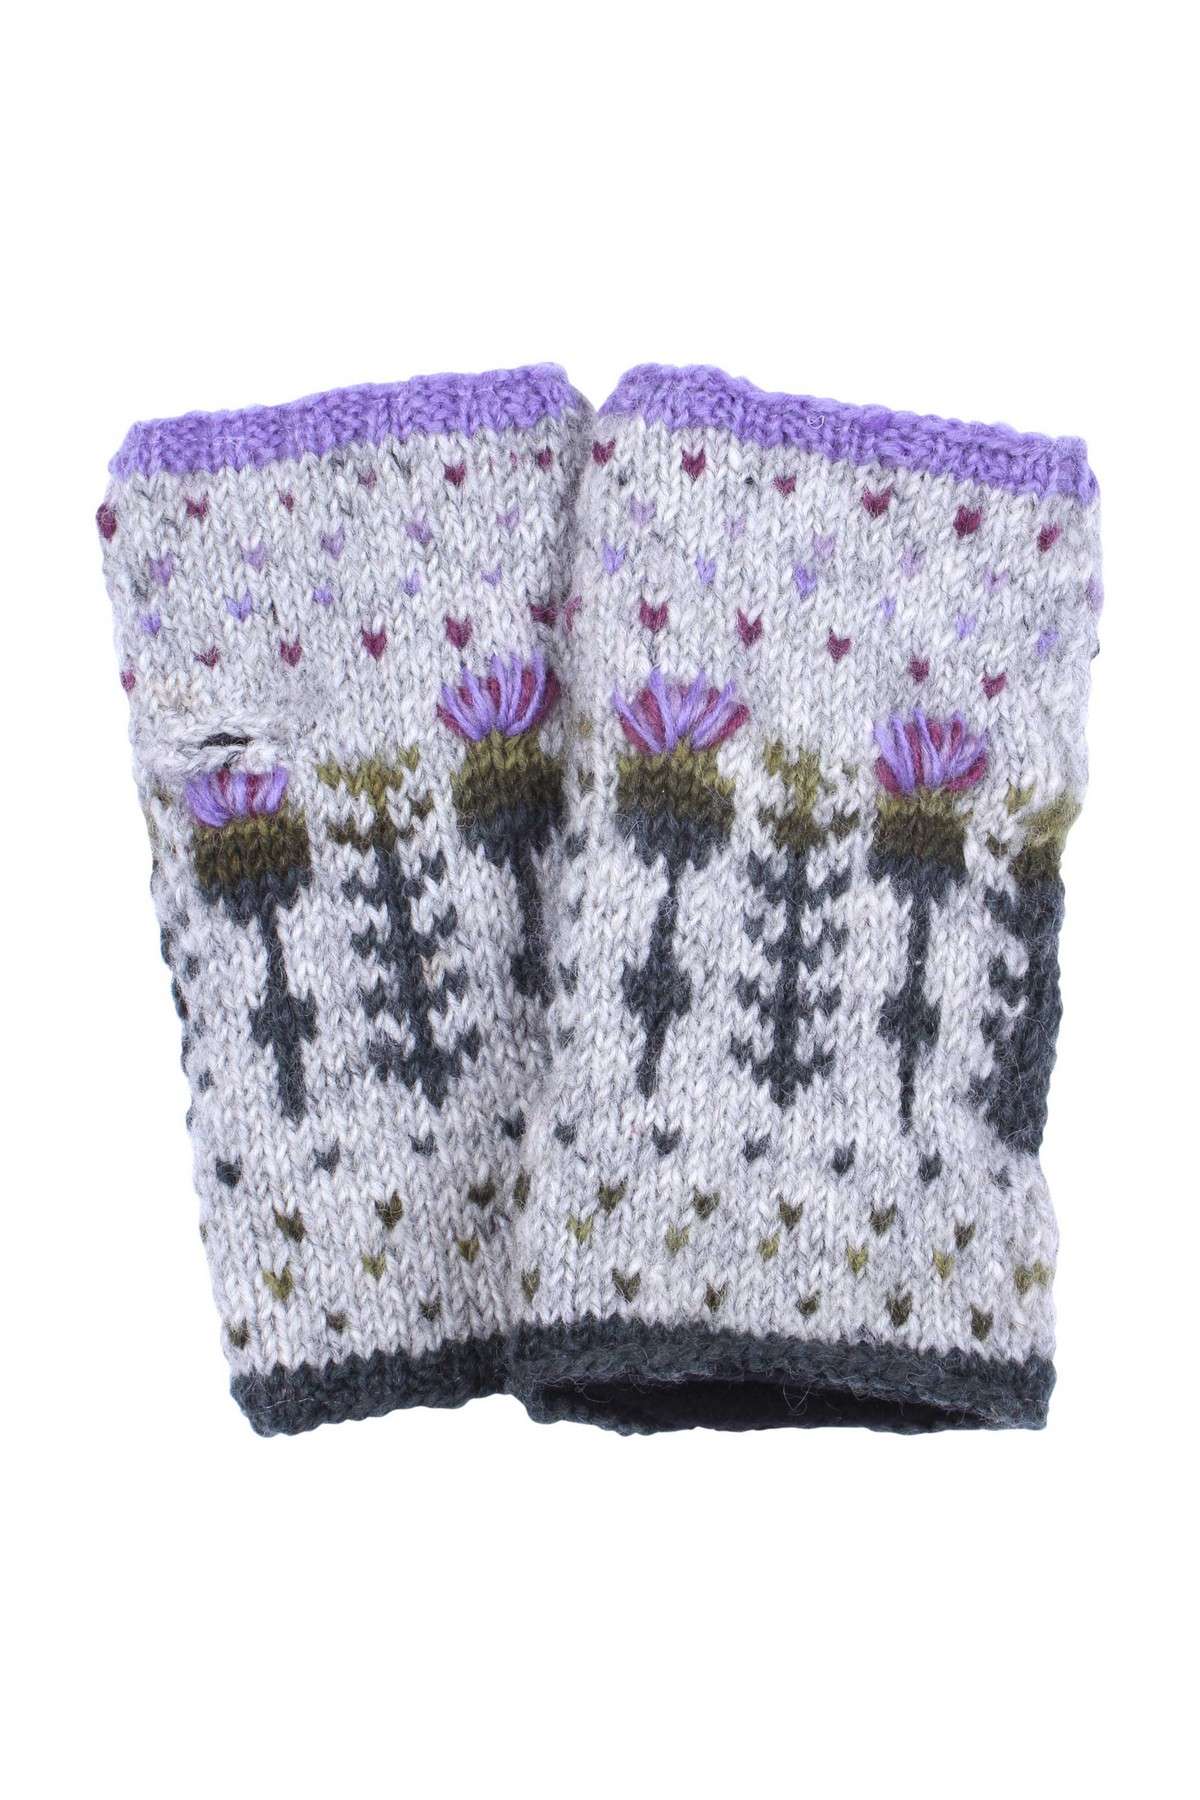 thistle handwarmer 2 <p style="text-align: center"><strong><span style="font-size: 18pt">Scottish Thistle Pattern Handwarmers.</span></strong></p> <p style="text-align: center"><span style="font-size: x-large">Individually embroidered thistles</span></p> <p style="text-align: center"><span style="font-size: x-large"><span id="span_description">Each thistle is carefully hand embroidered, creating for a very detailed look.</span></span></p> <p style="text-align: center"><span style="font-size: x-large">Embroidered with purple flowers. </span></p> <p style="text-align: center"><span style="font-size: x-large">100% Wool</span></p> <p style="text-align: center"><span style="font-size: x-large">Fleece lined</span></p> <p style="text-align: center">Colours and patterns may vary slightly due to the handmade nature of this product.</p> <div id="item_price" class="col-sm-12"> <p style="text-align: center">No two items are exactly the same!</p> <p style="text-align: center"> Handwarmer available in this pattern.</p> <p style="text-align: center">All colours are represented as closely as possible, we cannot guarantee 100% accuracy.</p> <h1 style="text-align: center">FREE P&P</h1> </div>